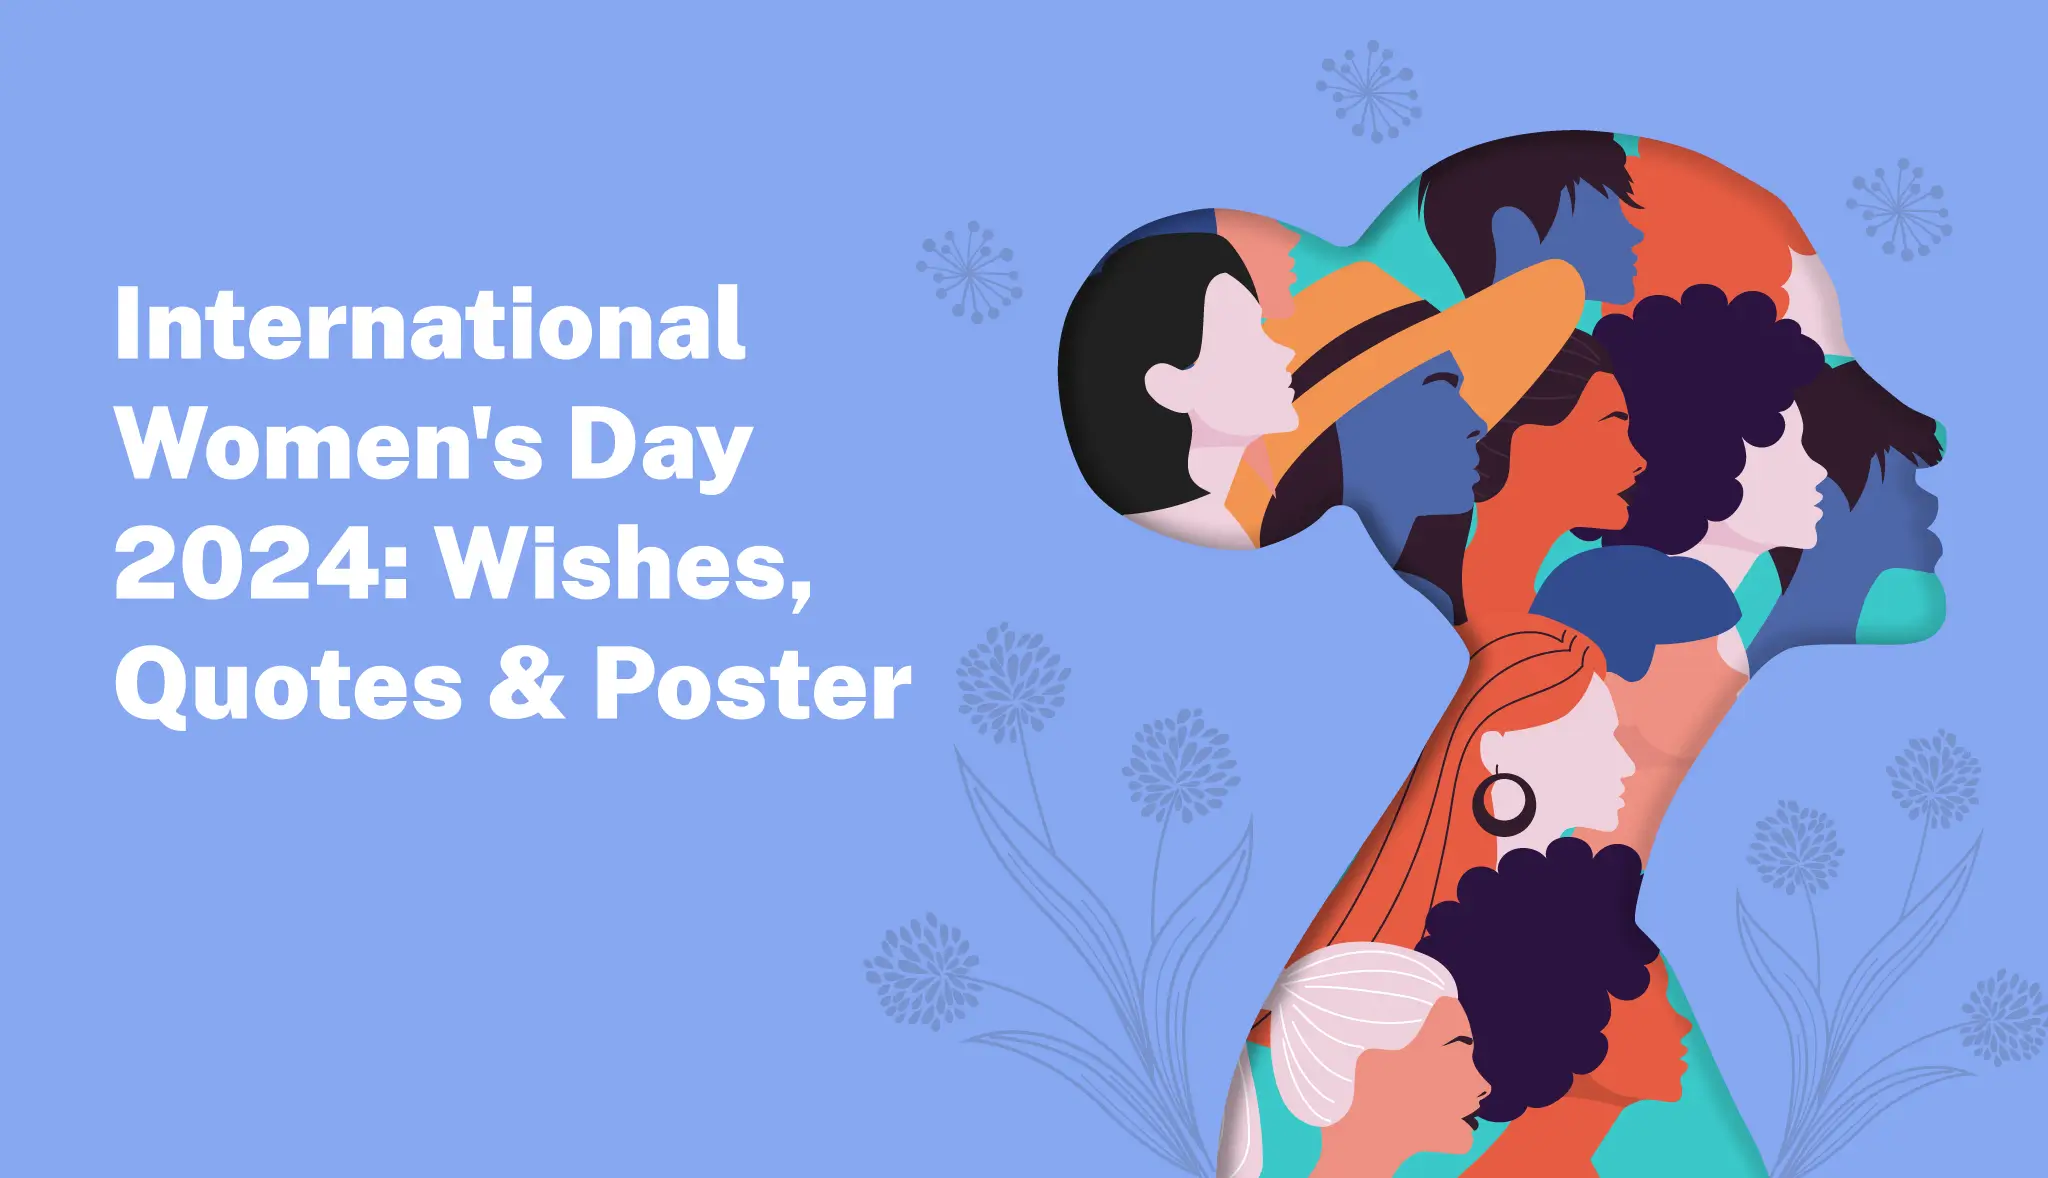 Happy International Women's Day 2024 Wishes, Quotes & Poster